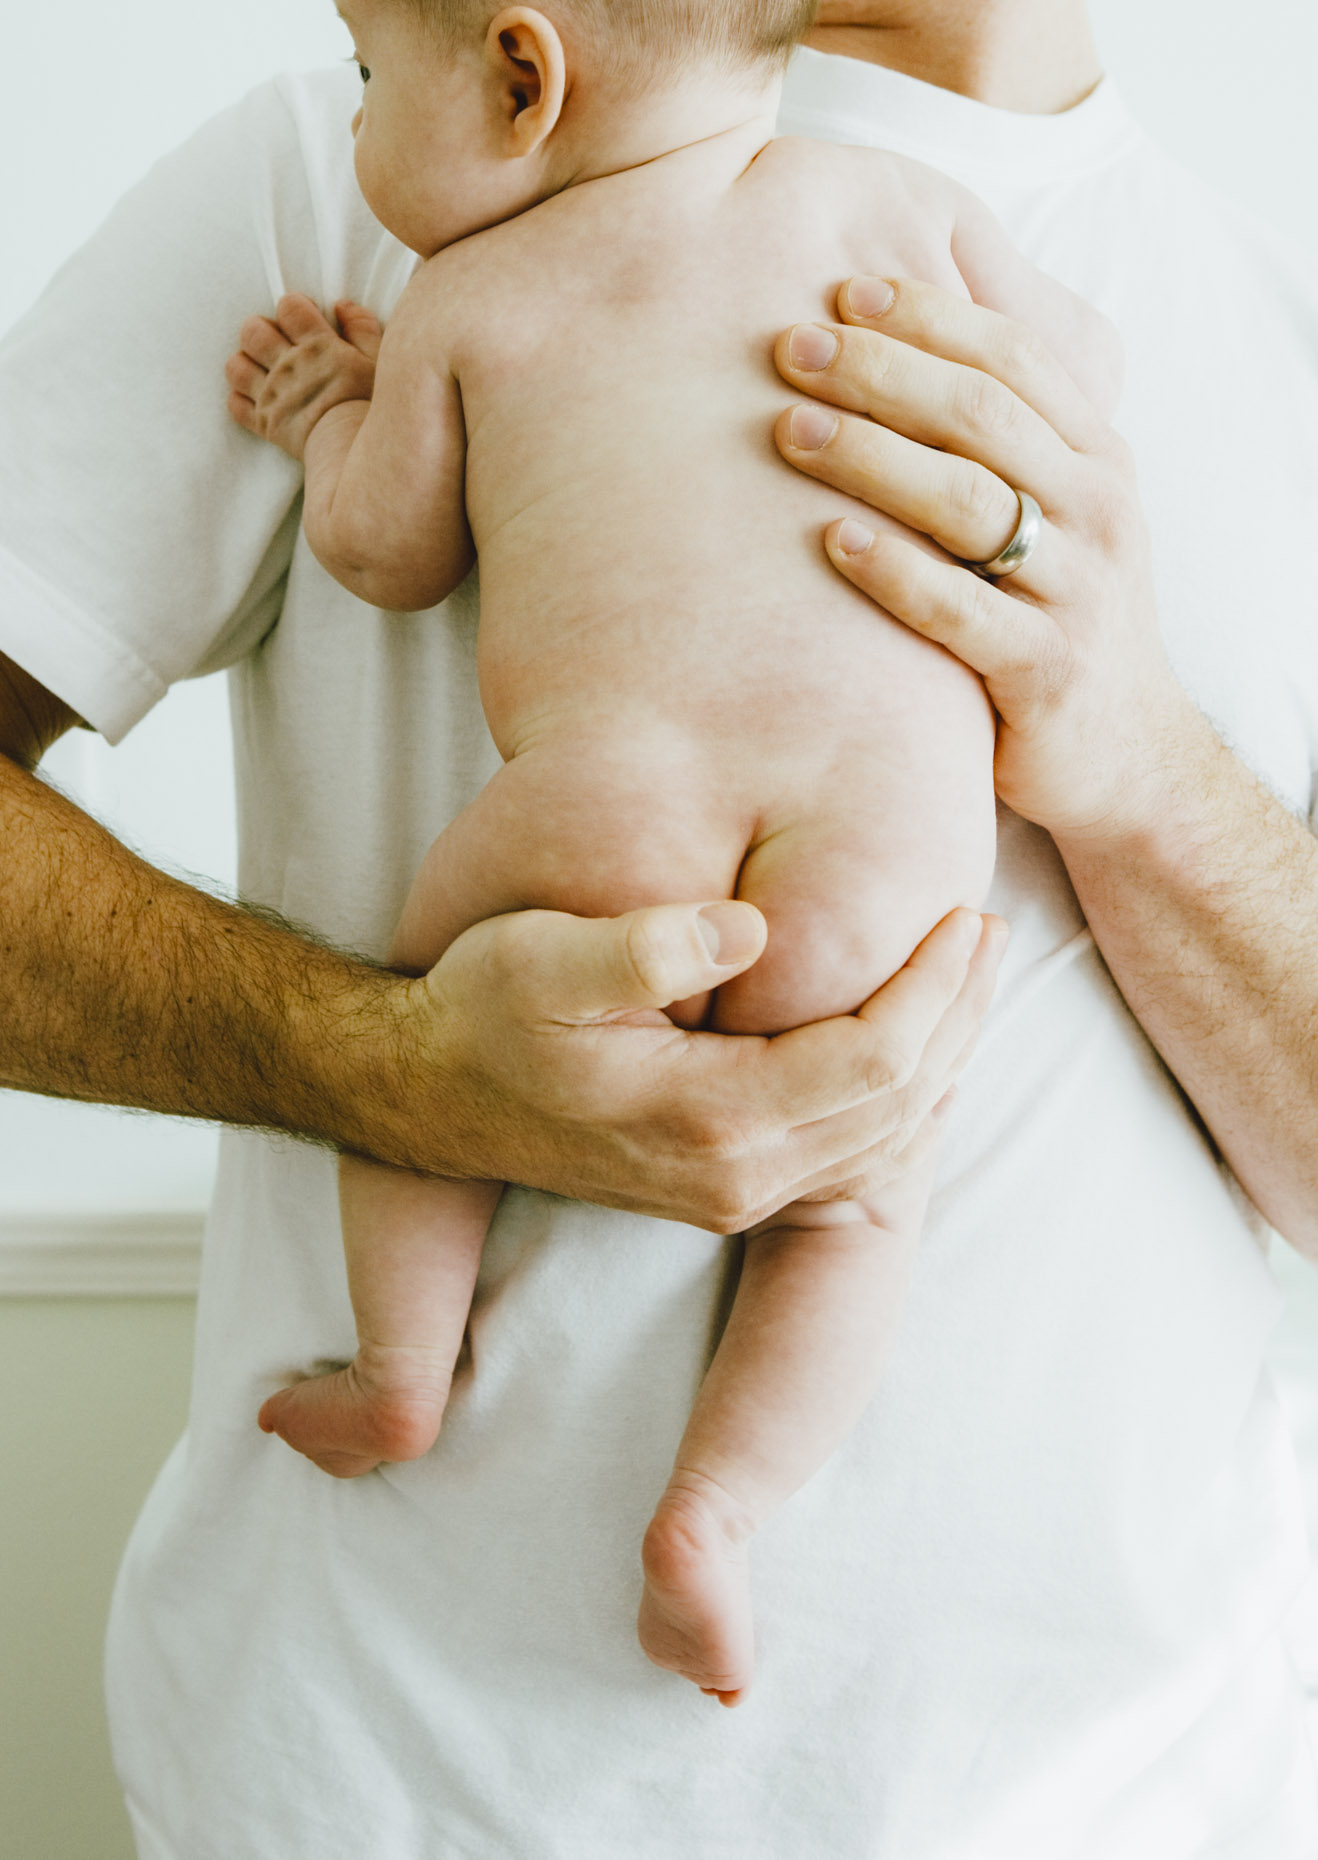 Naked baby held in dad